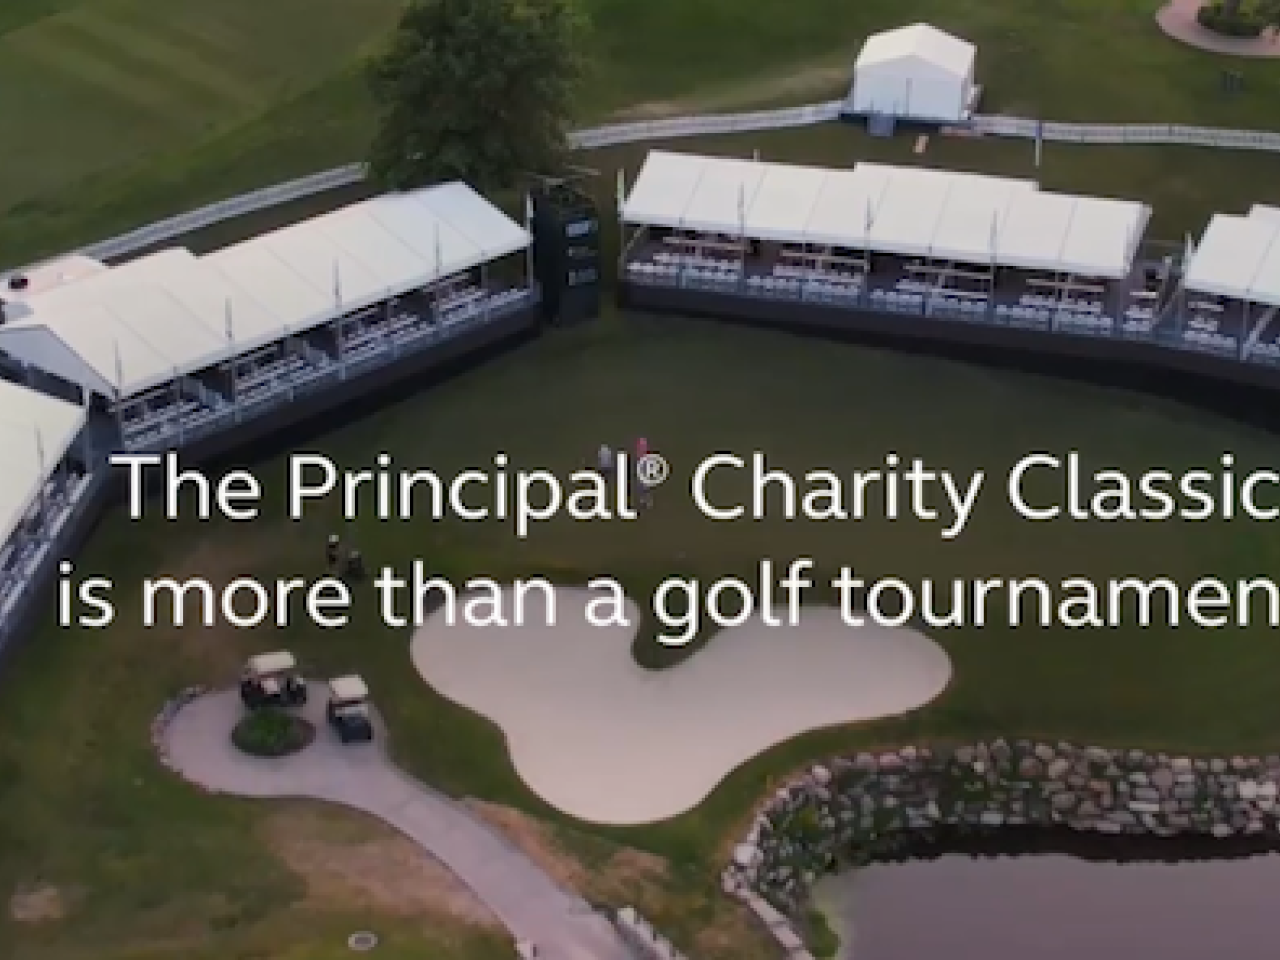 The Principal Charity Classic is more than a golf tournament.